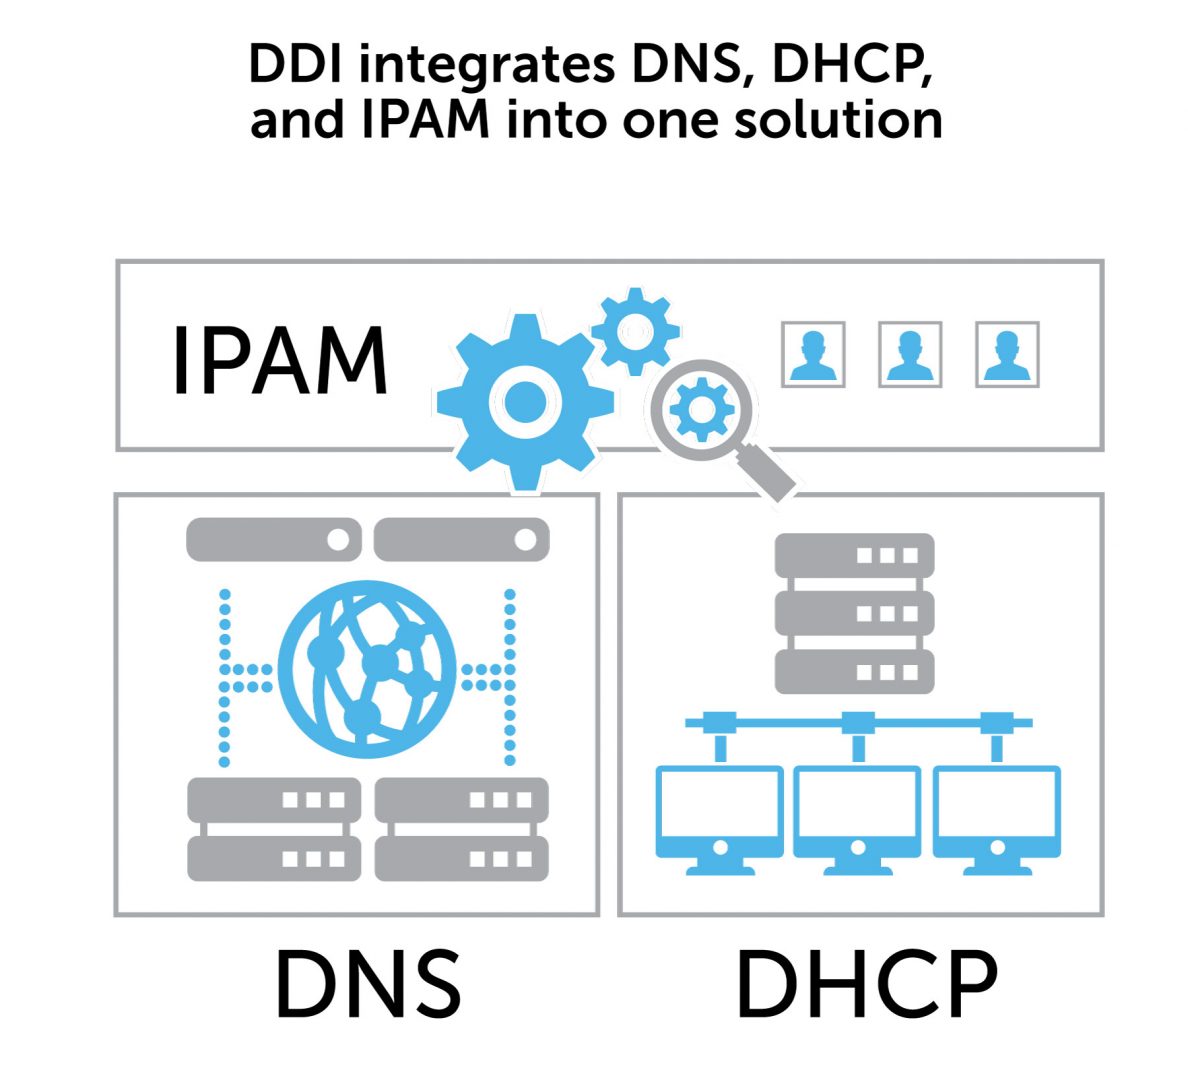 DDI integrates DNS DHCP and IPAM into one solution